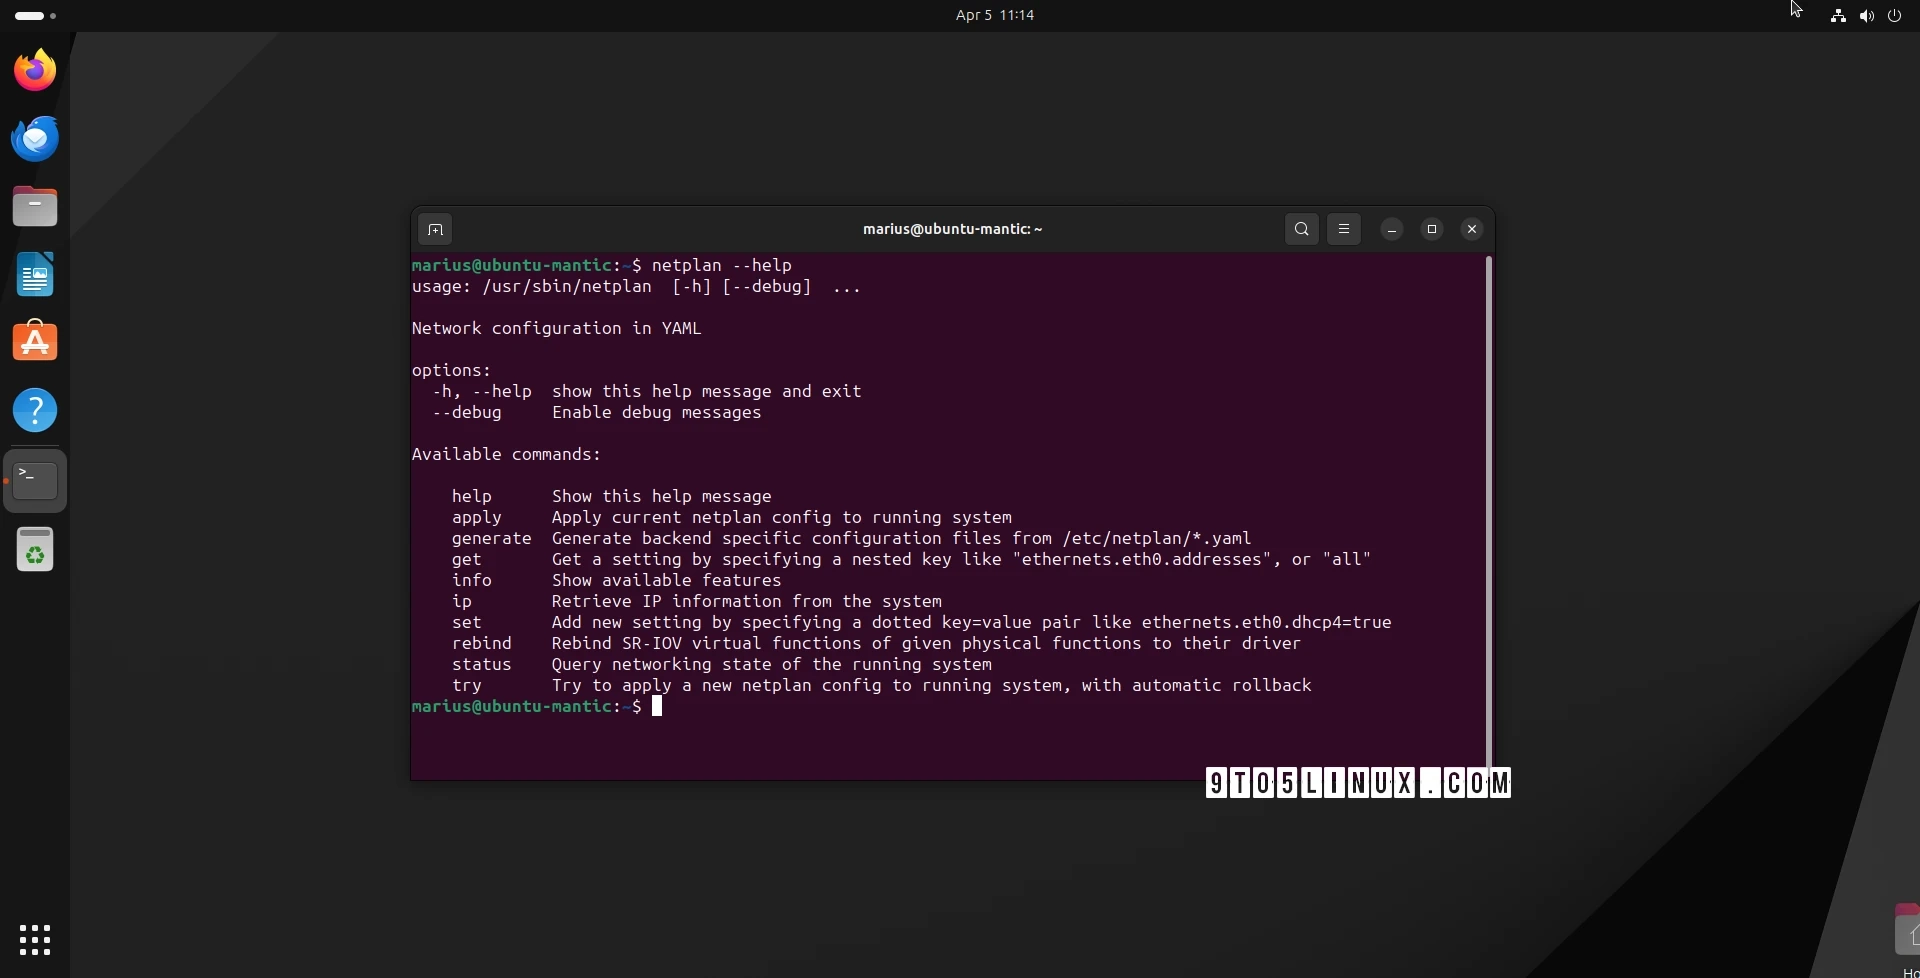 Canonical Unveils Netplan 1.0: Now Featuring Simultaneous WPA2 and WPA3 Support